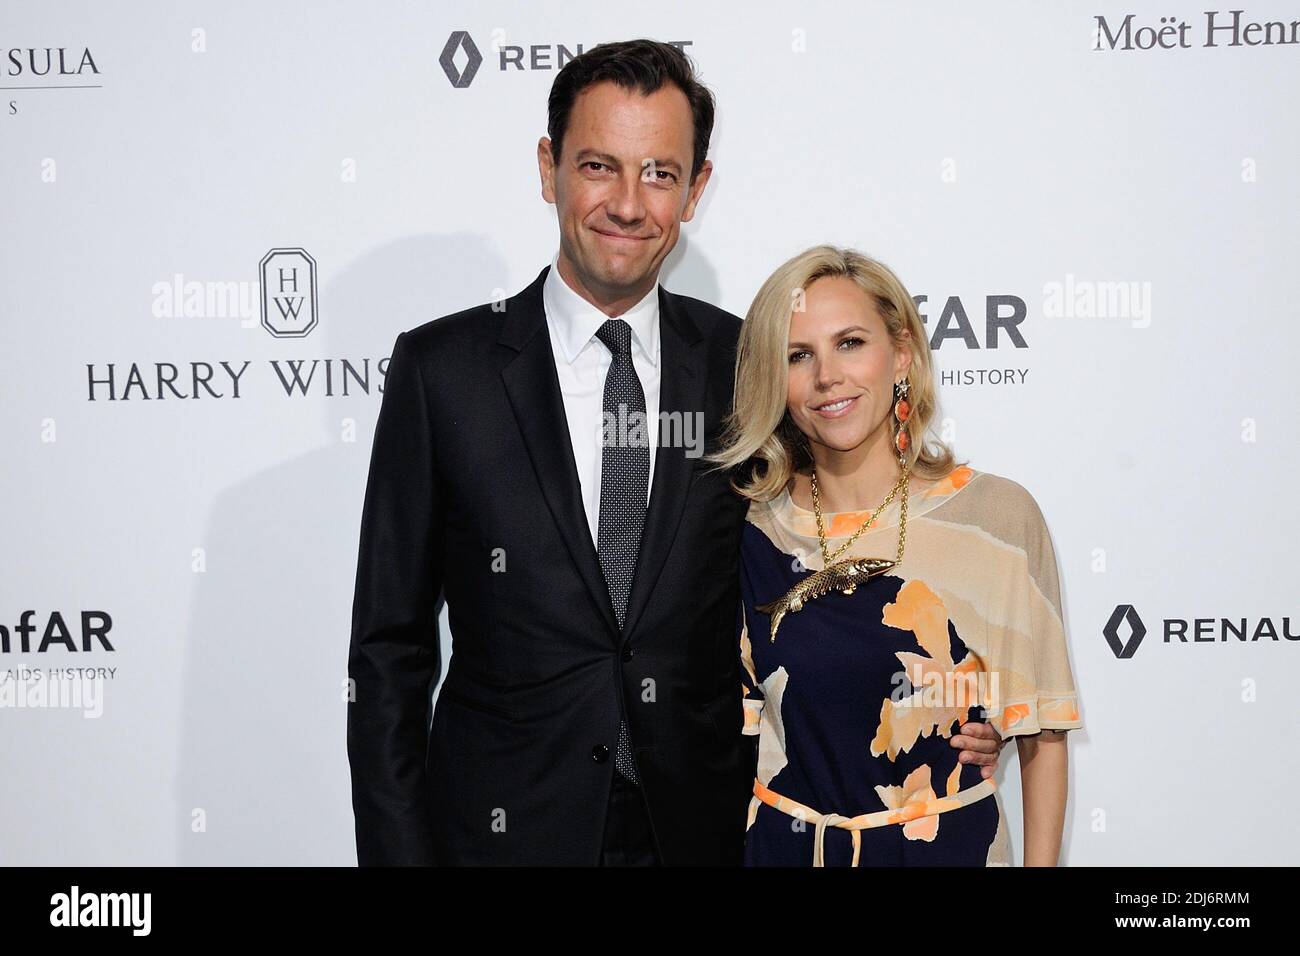 106 Tory Burch Pierre Yves Roussel Photos & High Res Pictures - Getty Images